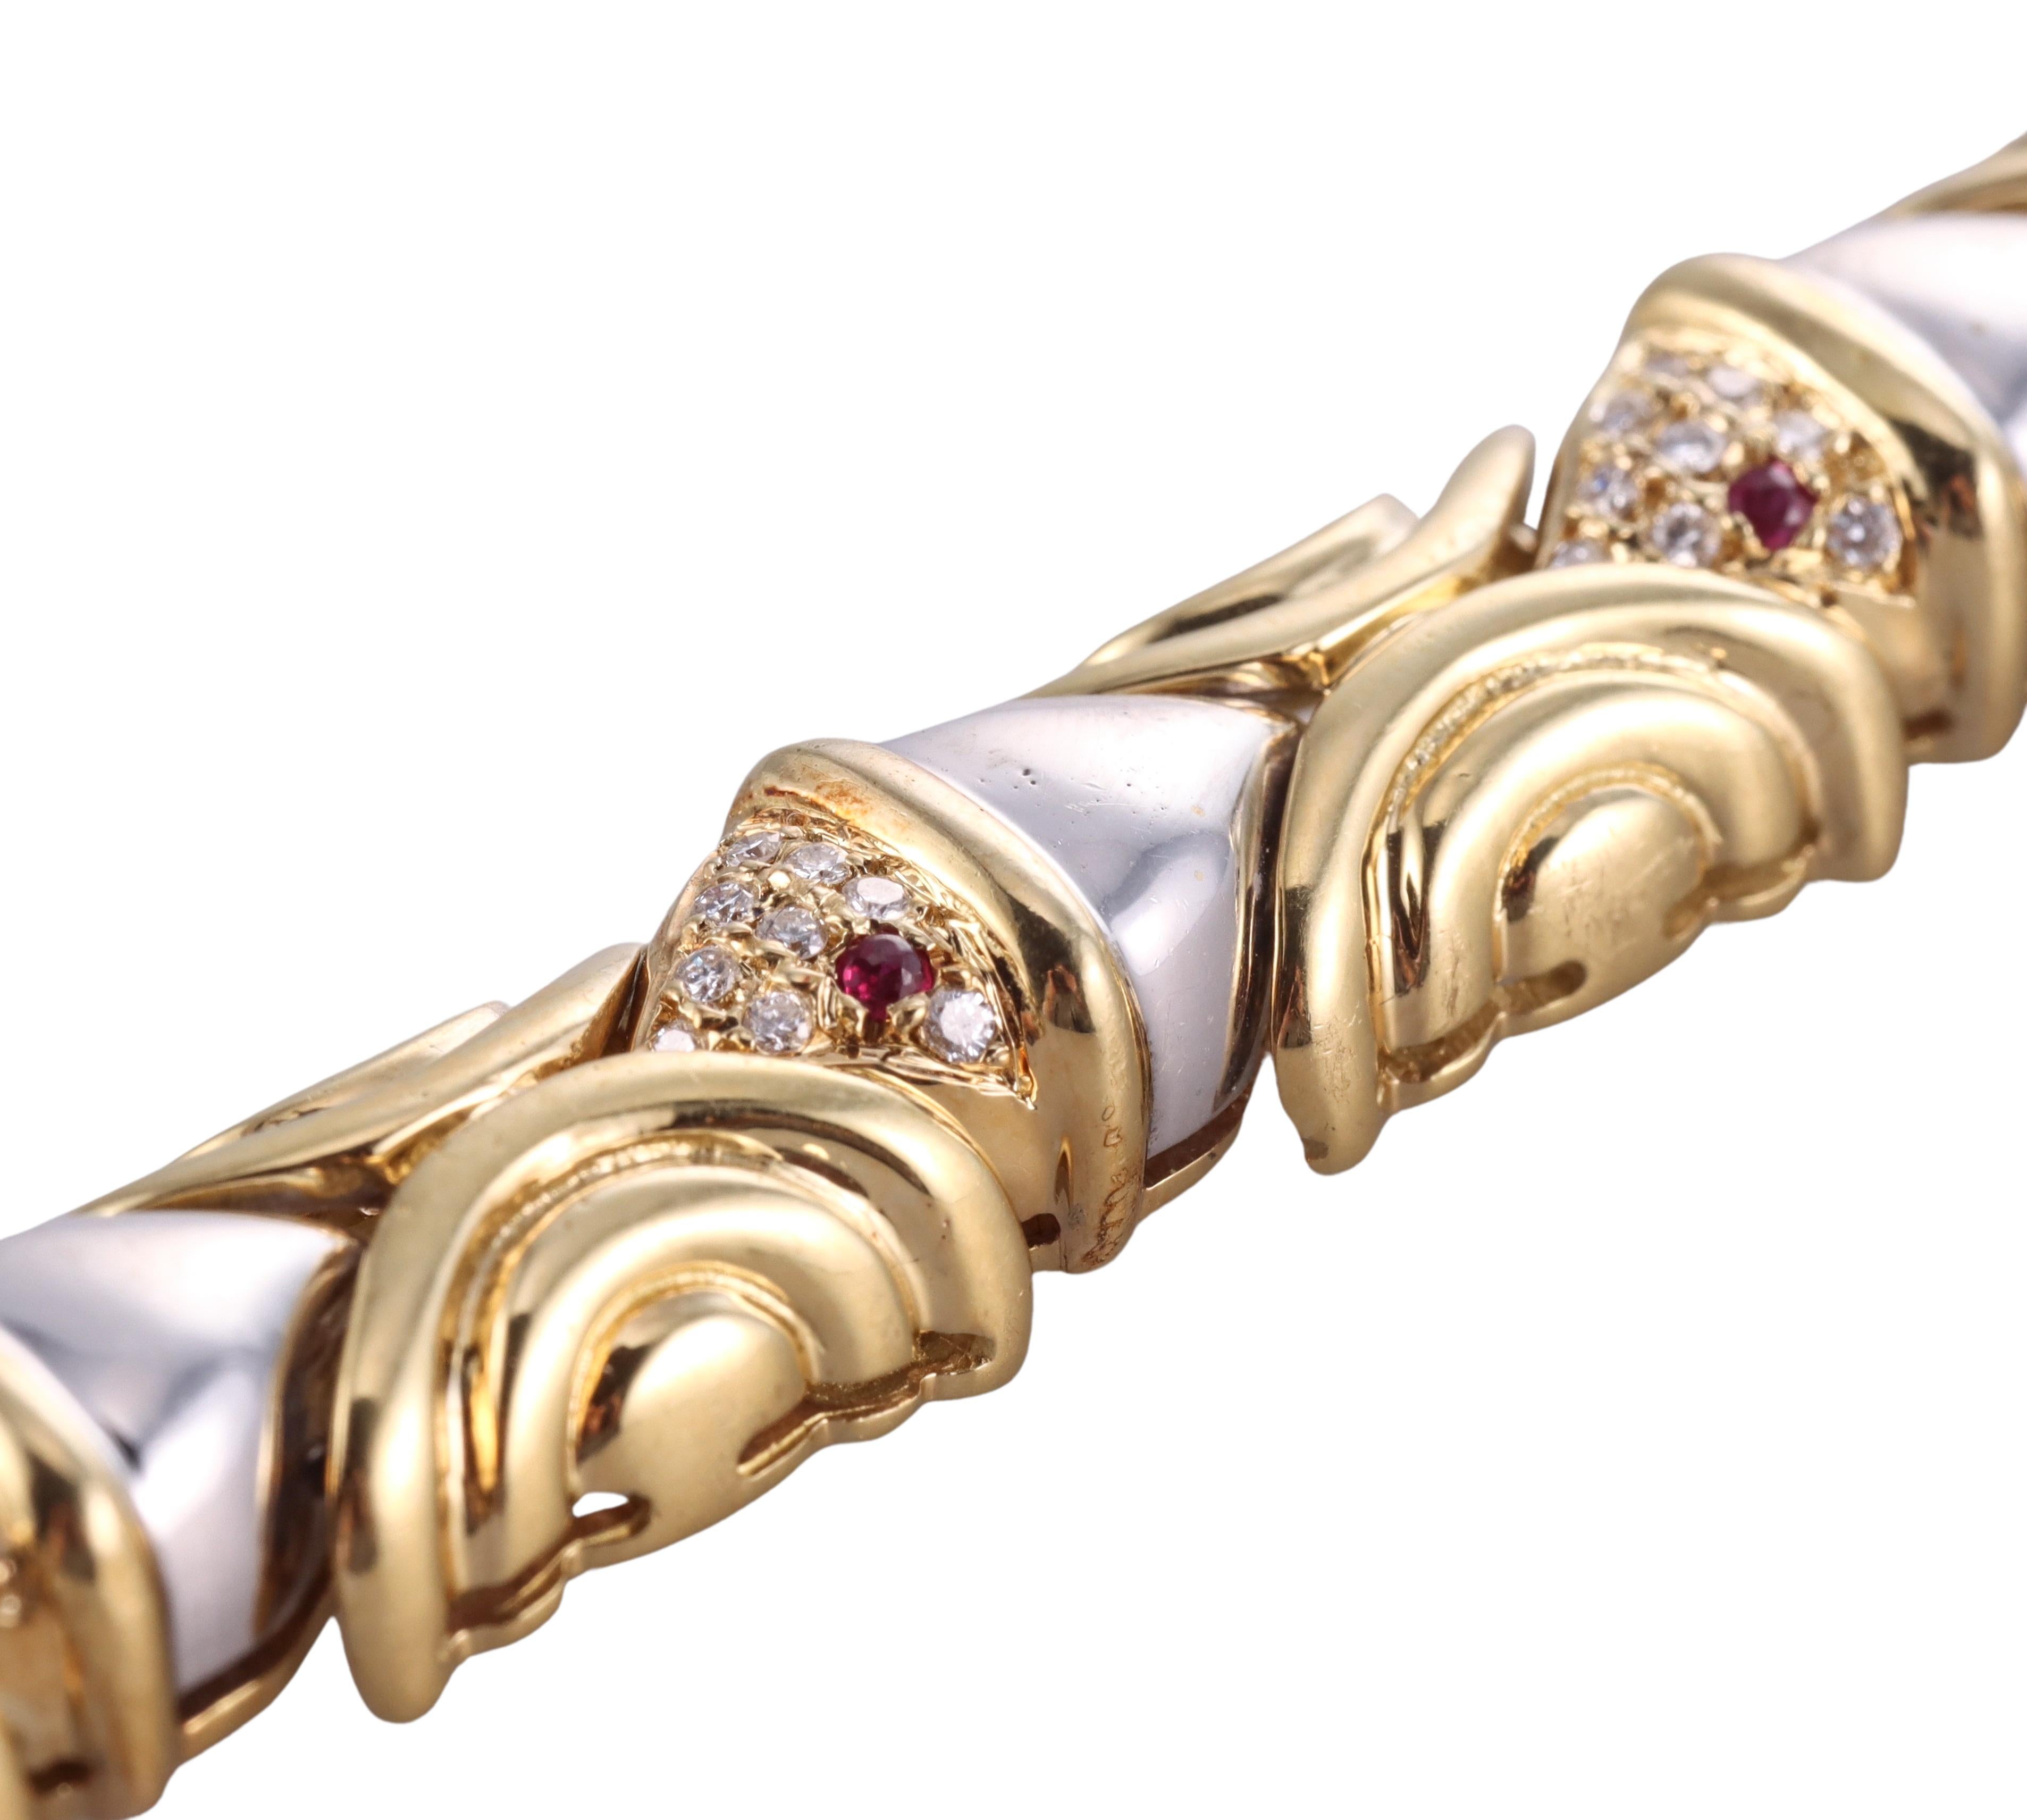 18k yellow and white gold fish motif bracelet, set with 0.45ctw H/VS diamonds and ruby eyes. Bracelet is 7